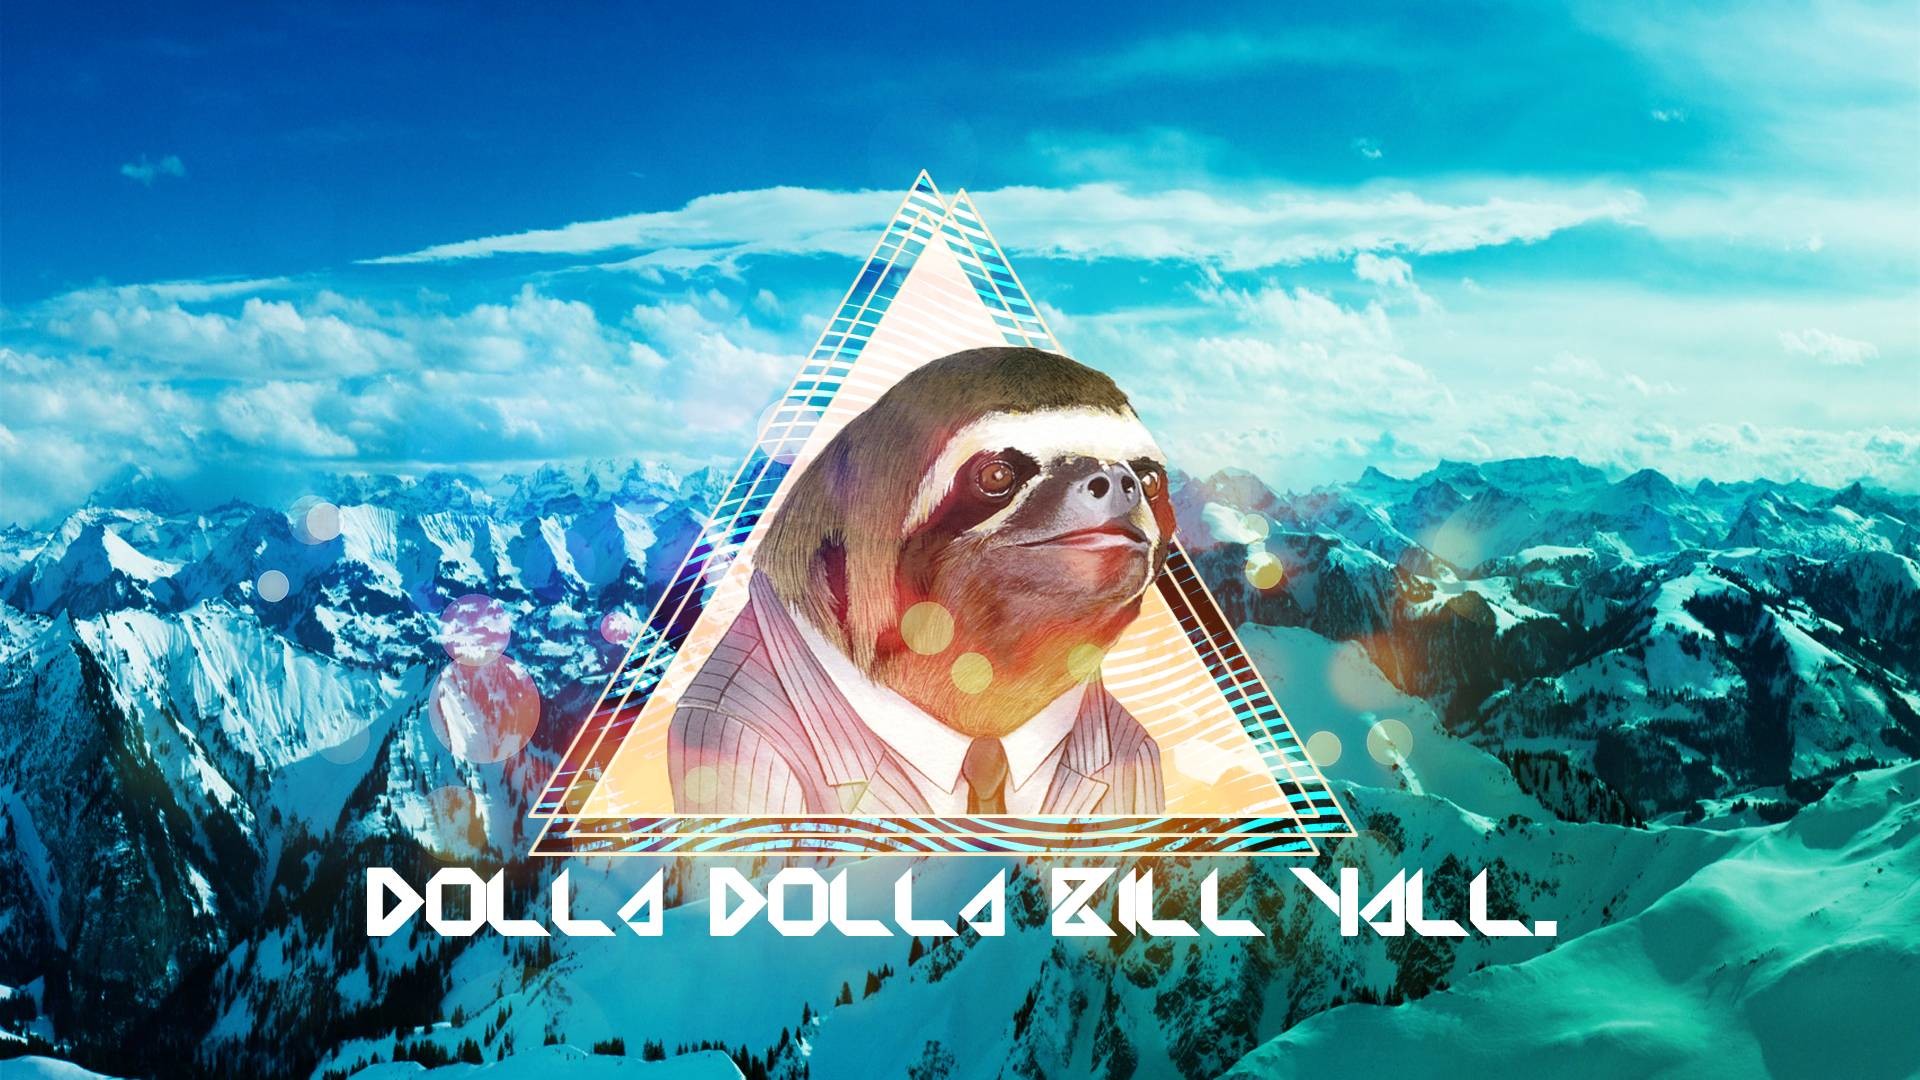 1920x1080 I'm dumping my sloth backgrounds.